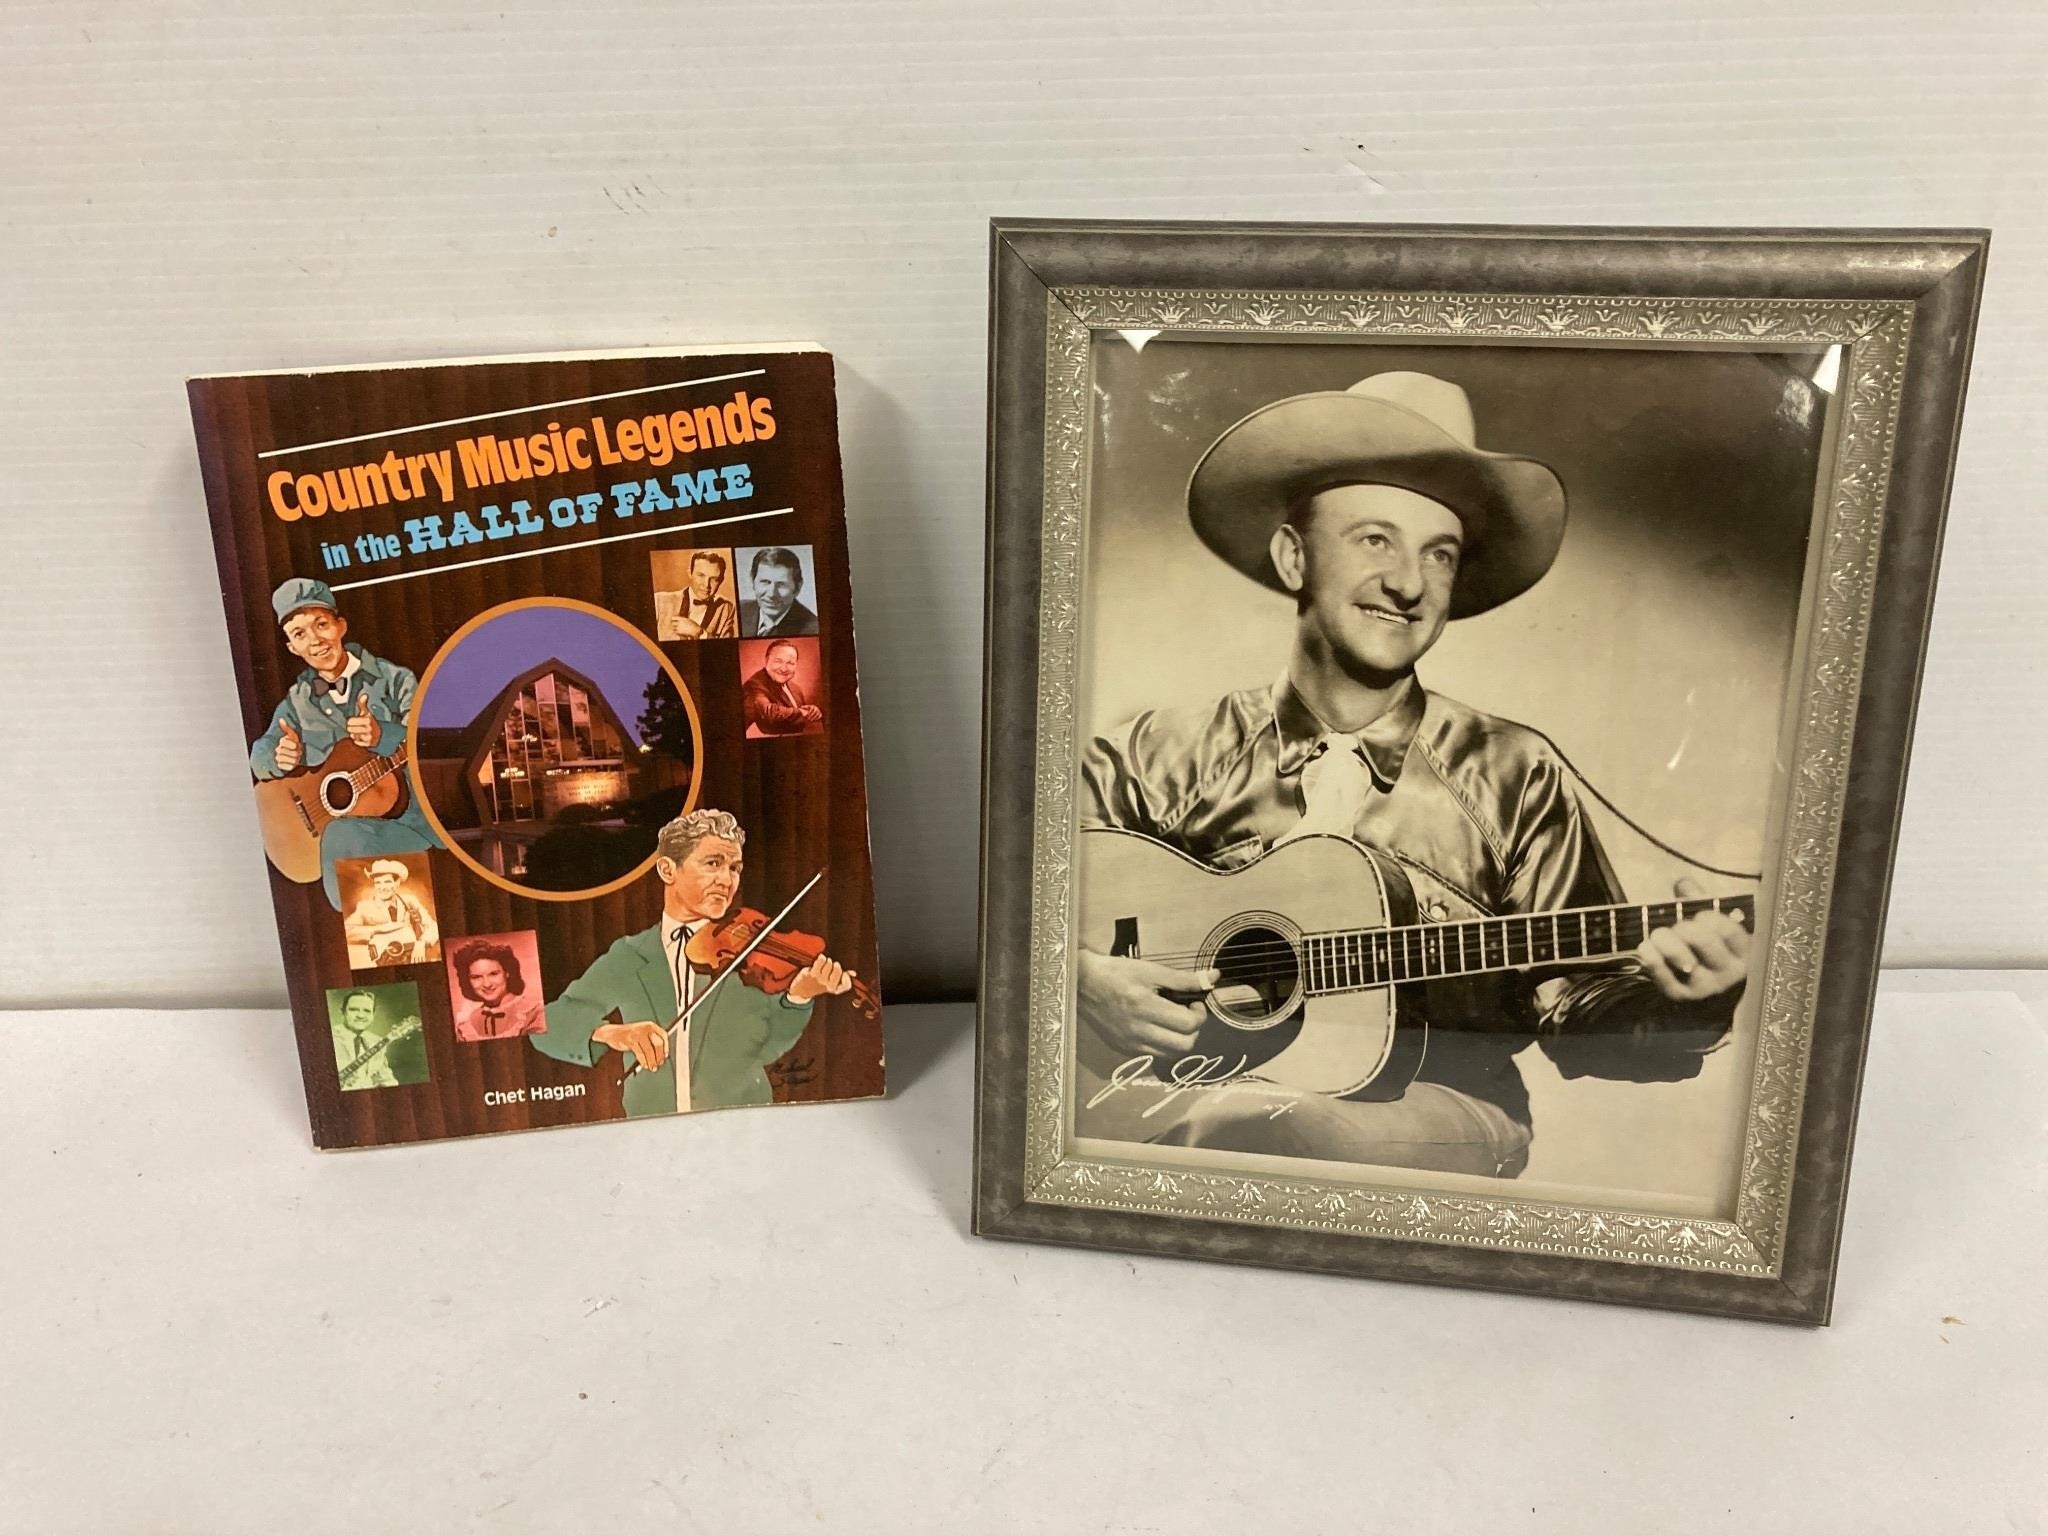 Autographed photo and Hall of Fame music legends